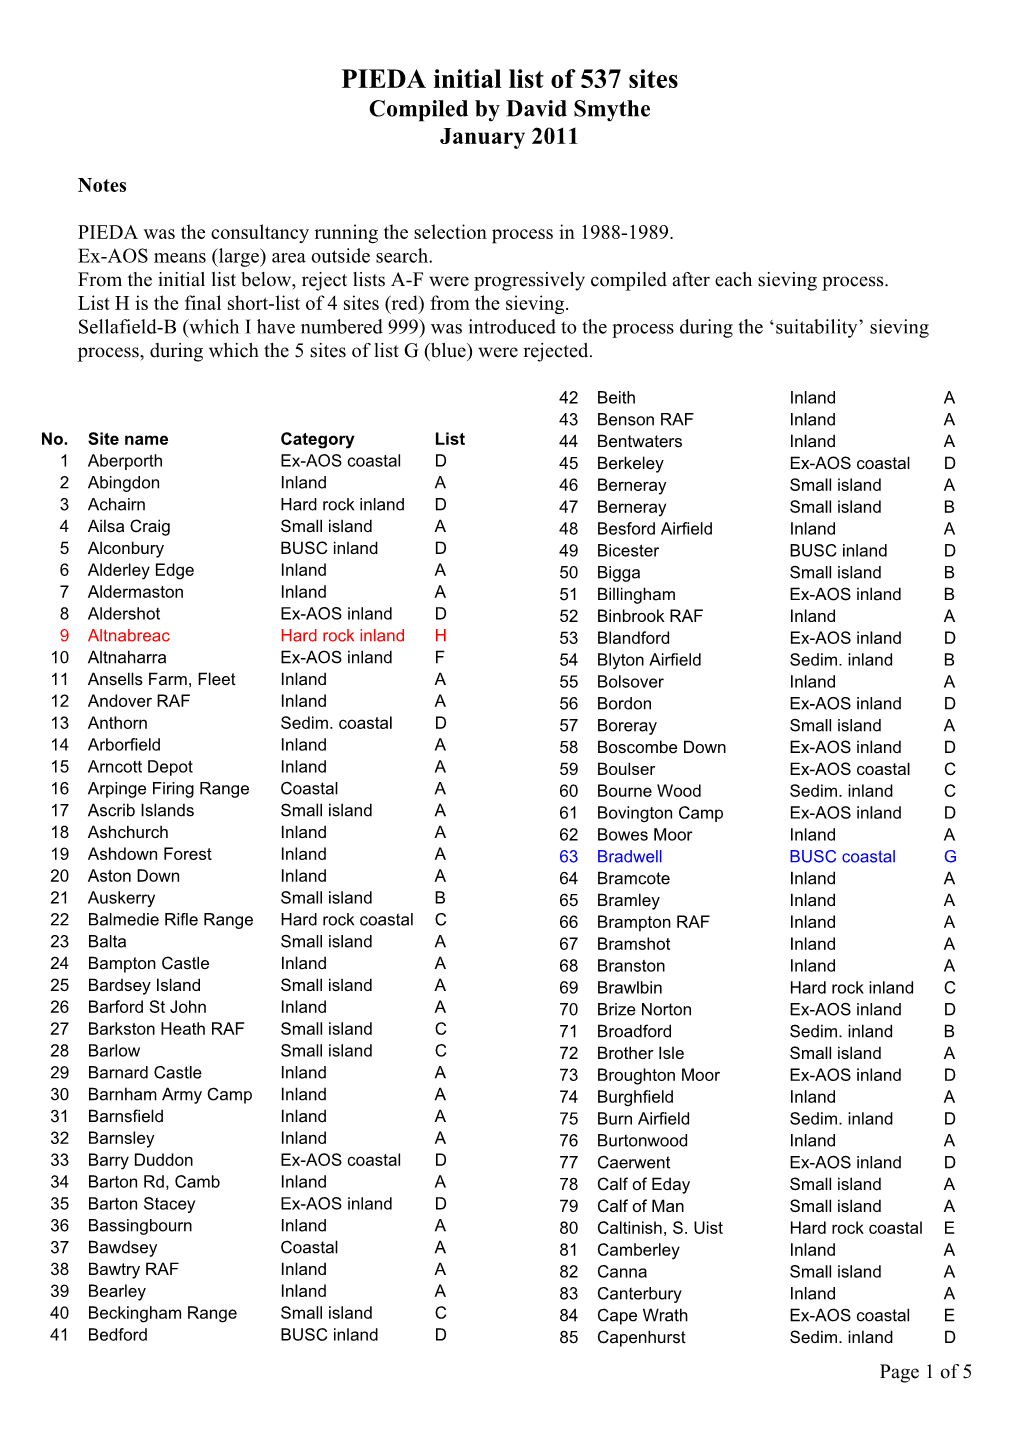 PIEDA Initial List of 537 Sites Compiled by David Smythe January 2011